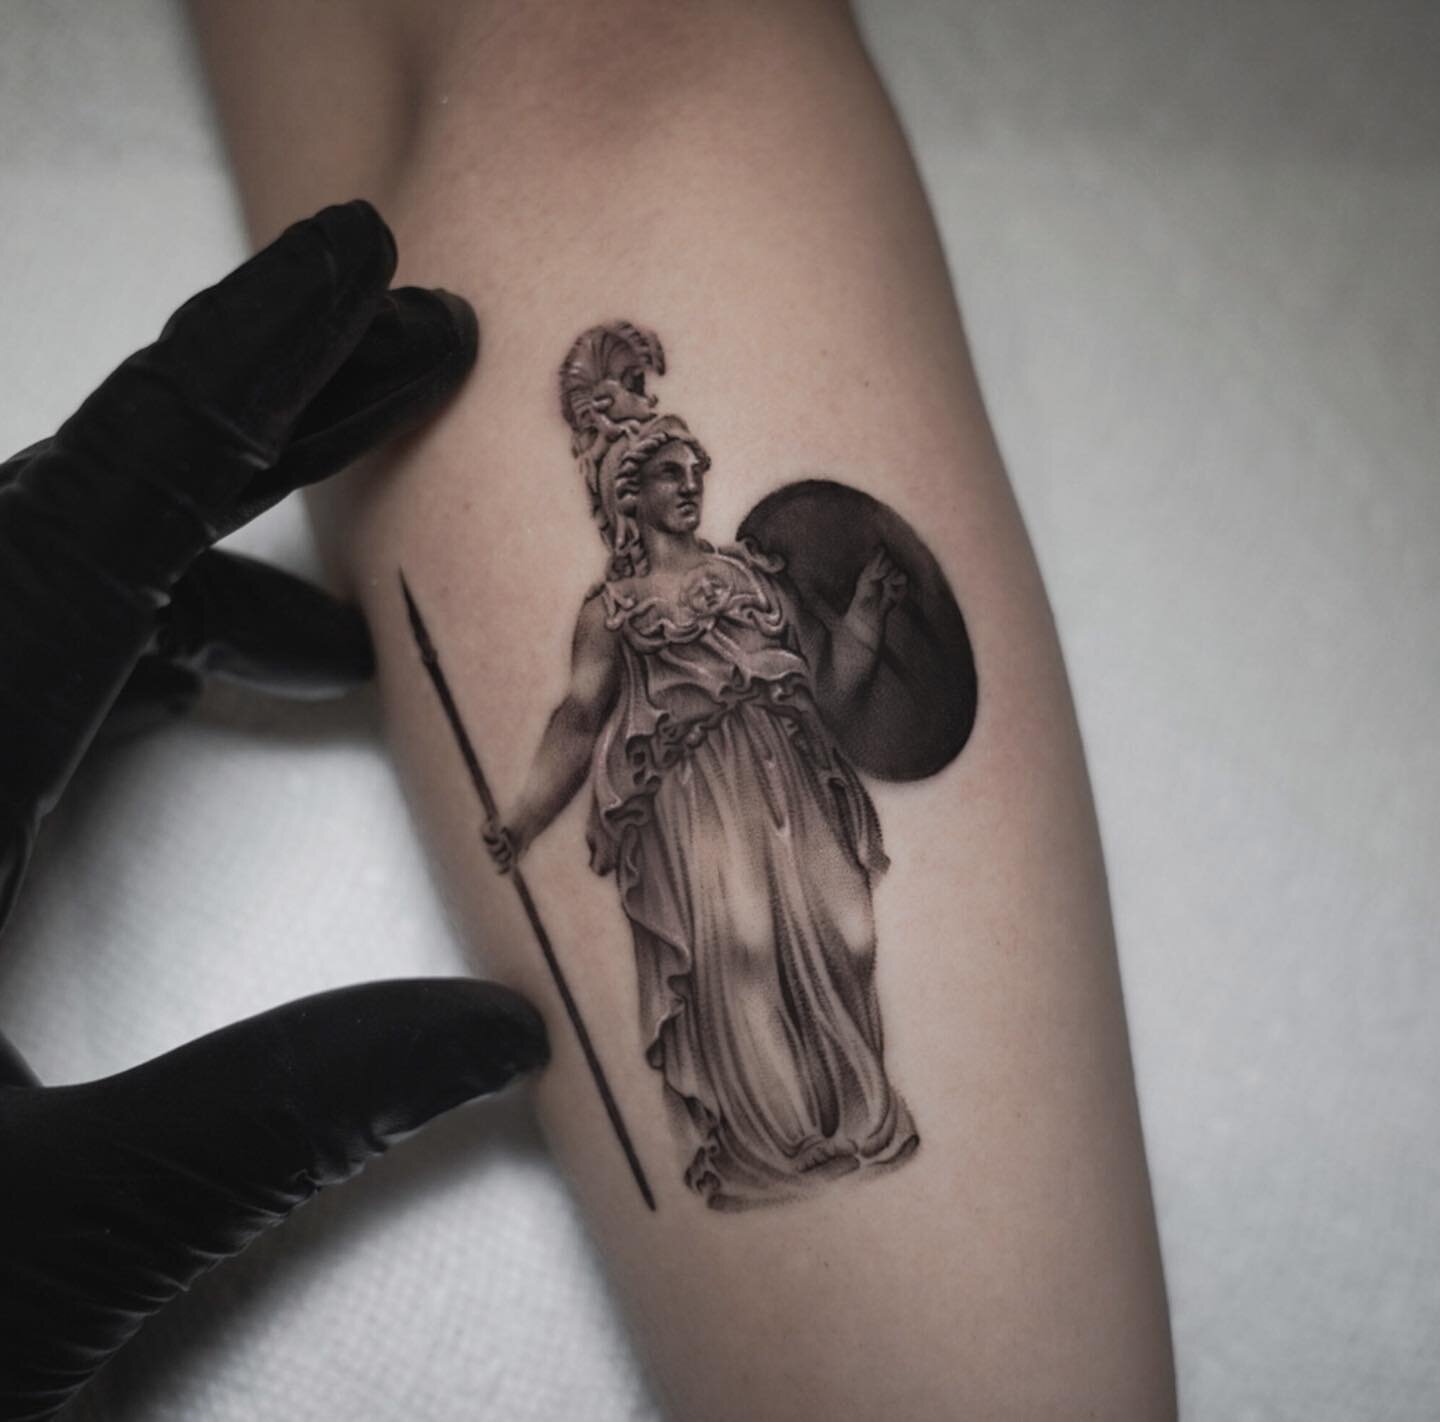 Little Athena statue 🤺 This one was a challenge to do at this size, but fun! 
|
|
|
|
|
|
#statuetattoo #greektattoo #microtattoo #microrealism #fineline #finelinetattoo #realismtattoo #blackandgrey #blackandgraytattoo #temeculatattoo #californiatat